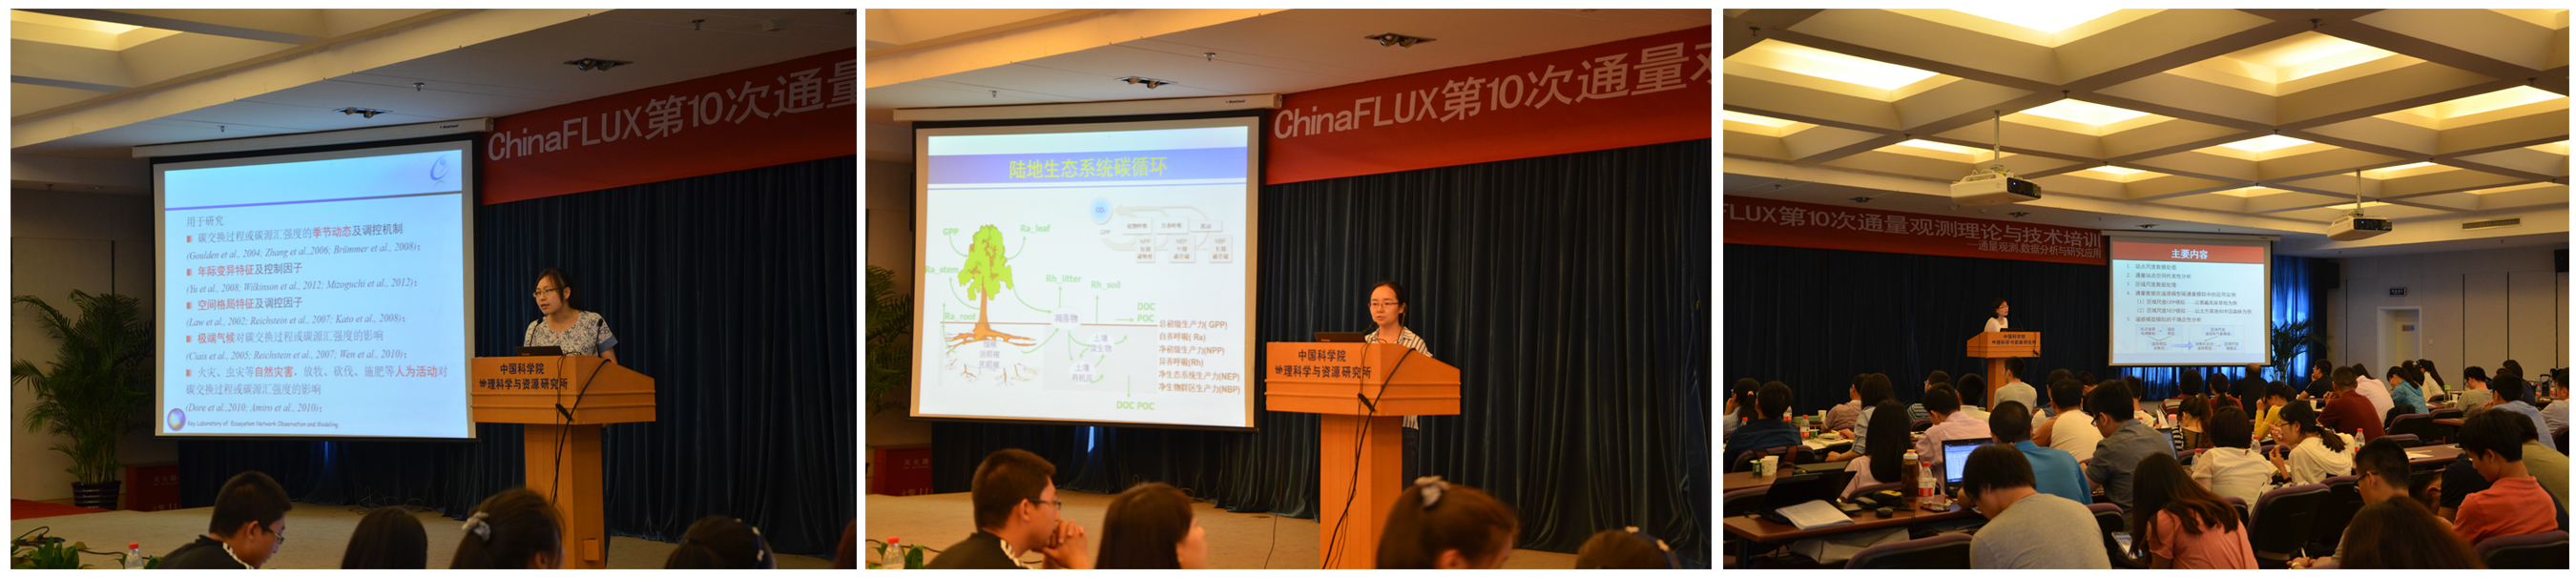 LICA attended the 10th ChinaFLUX Training Conference on Flux observation Theory and Technology